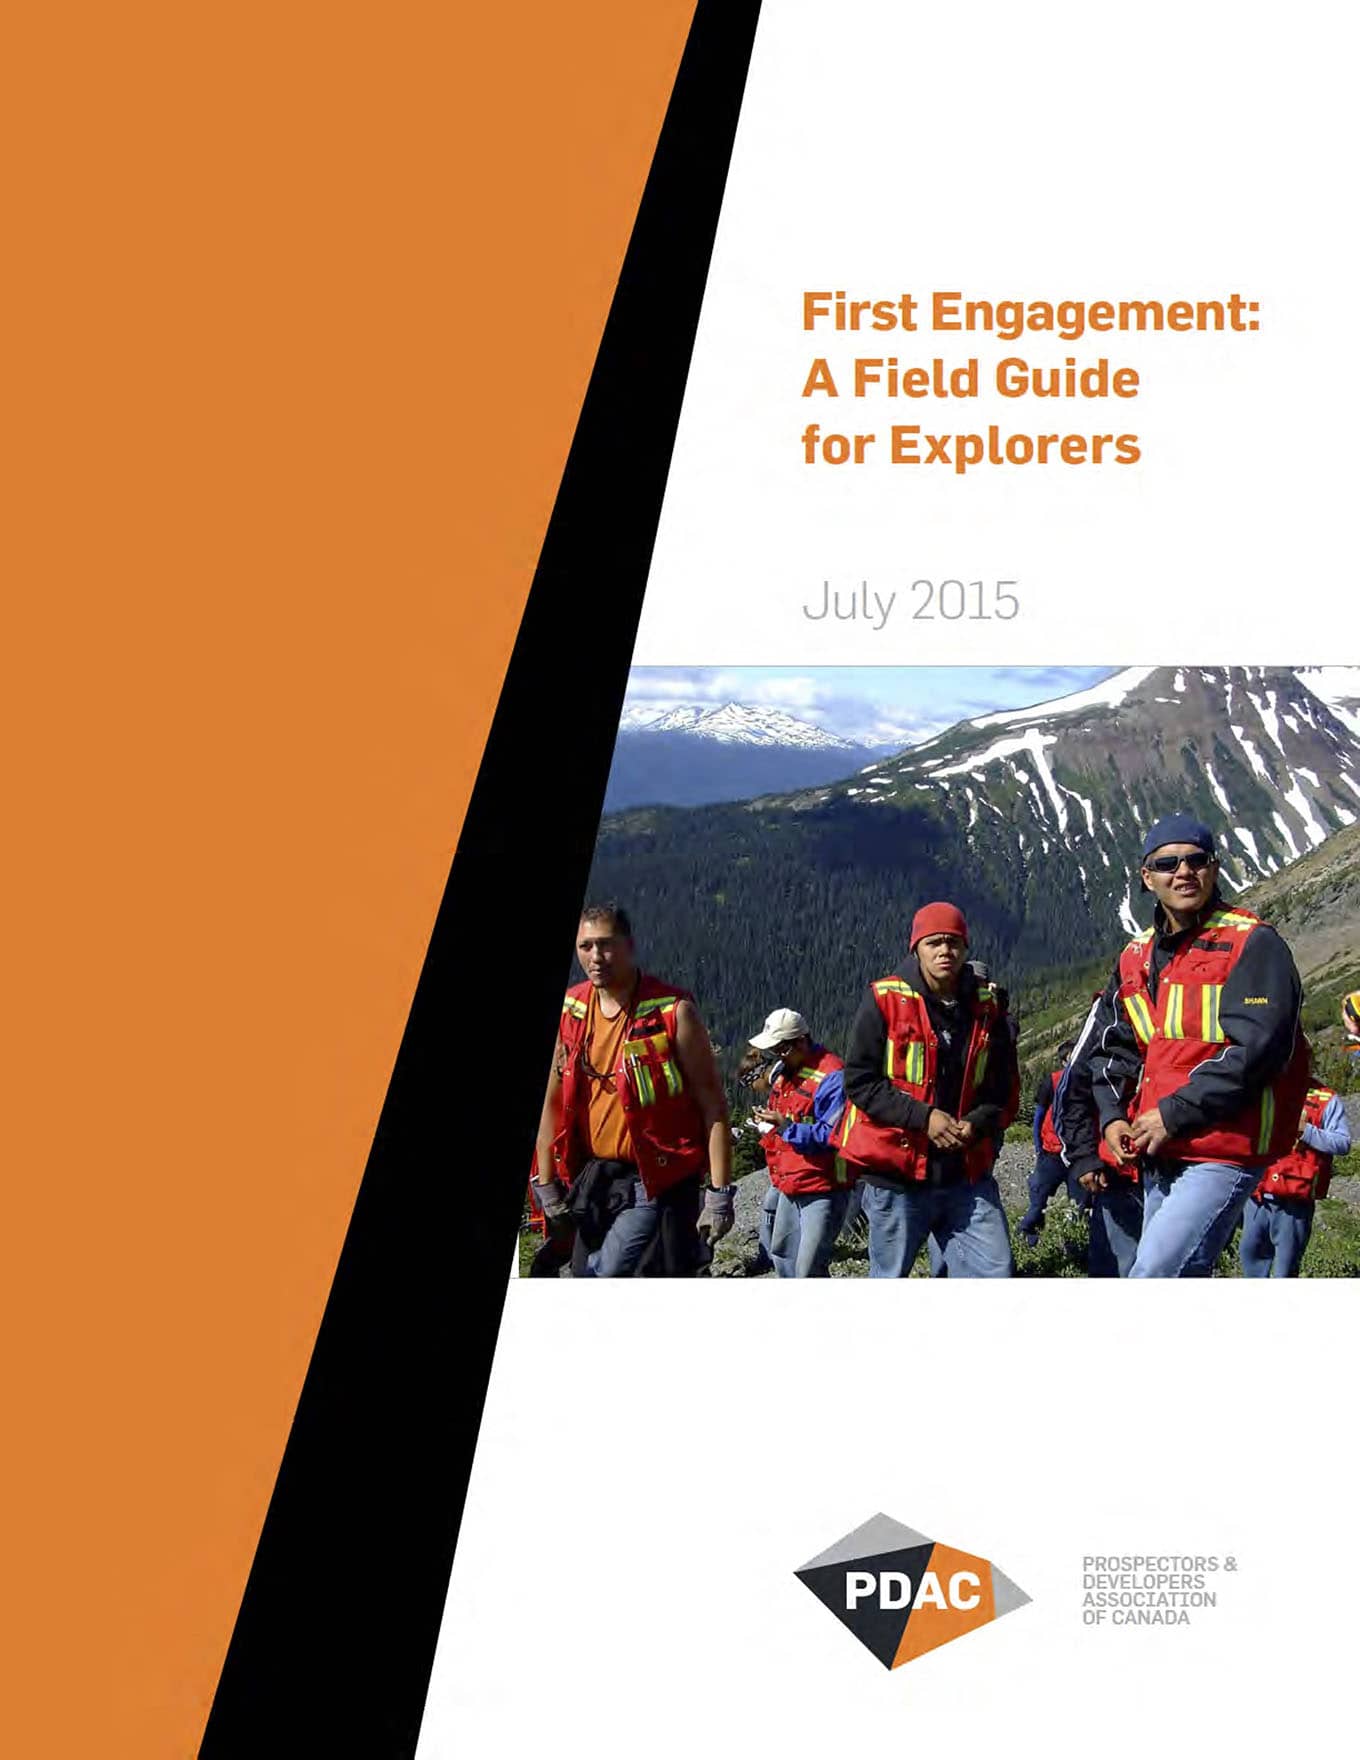 First Engagement: A Field Guide for Explorers (PDAC, 2015)